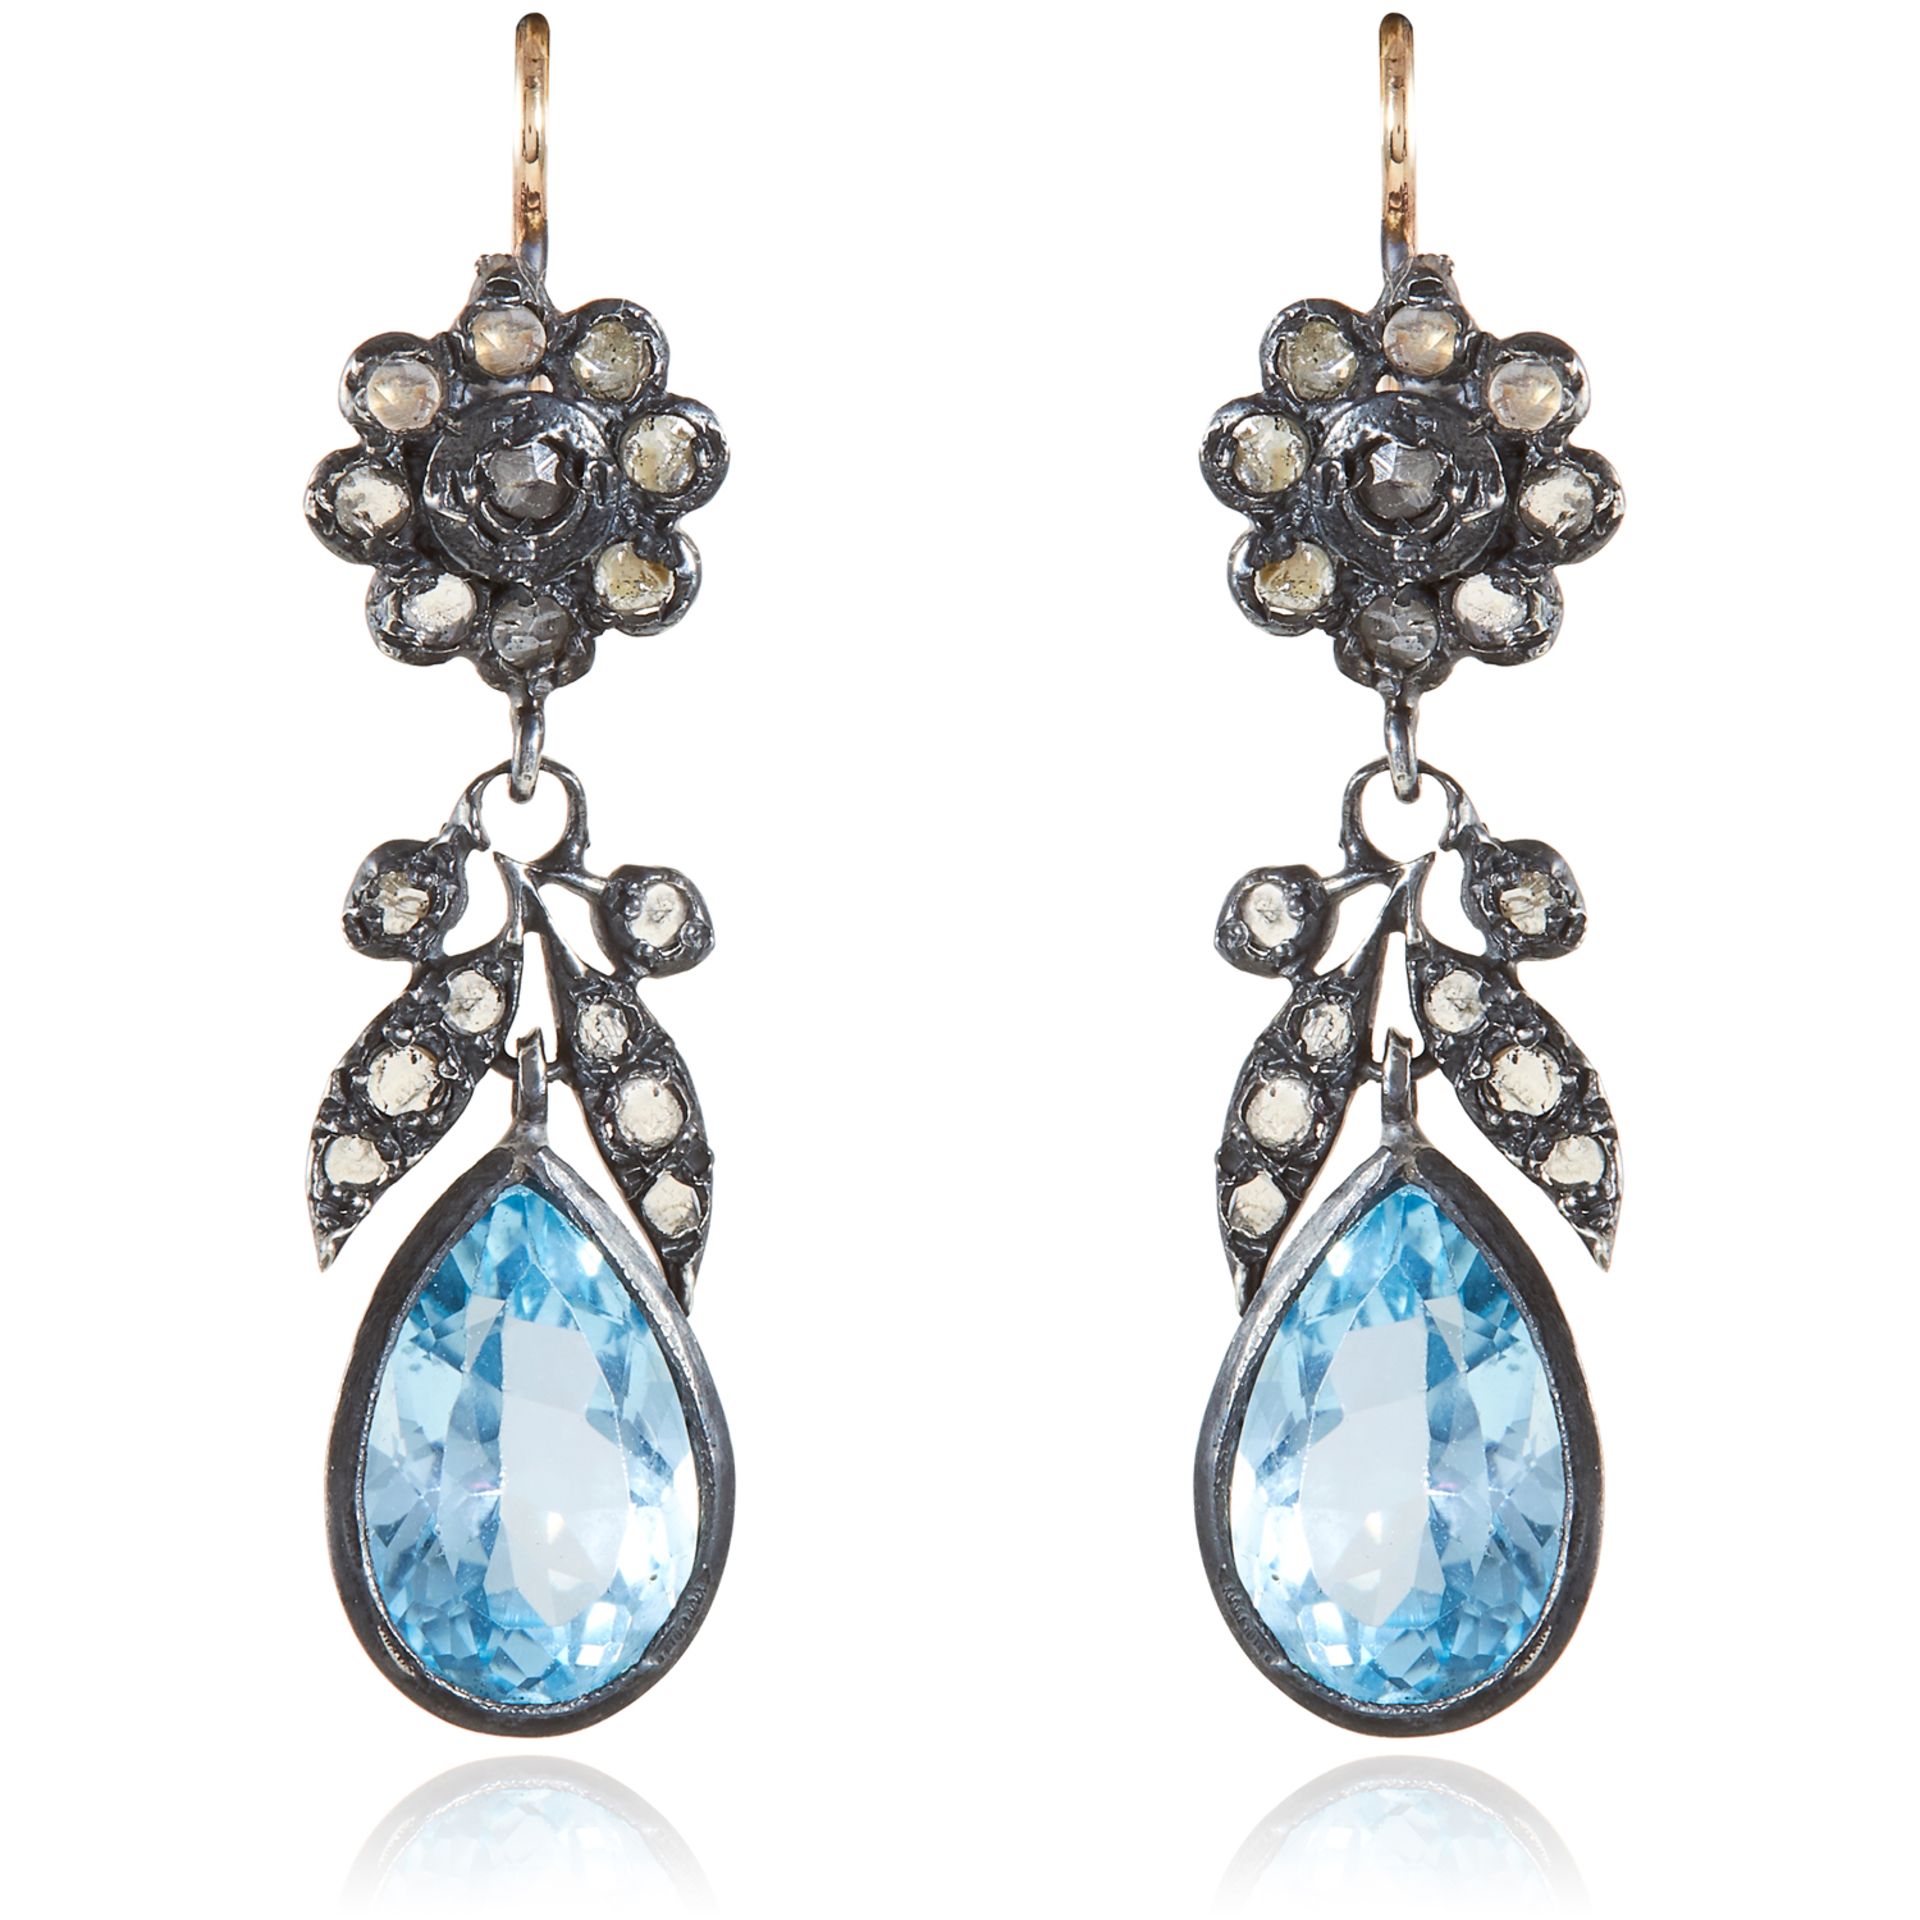 A PAIR OF ANTIQUE AQUAMARINE AND DIAMOND EARRINGS, 19TH CENTURY in gold and silver, each set with